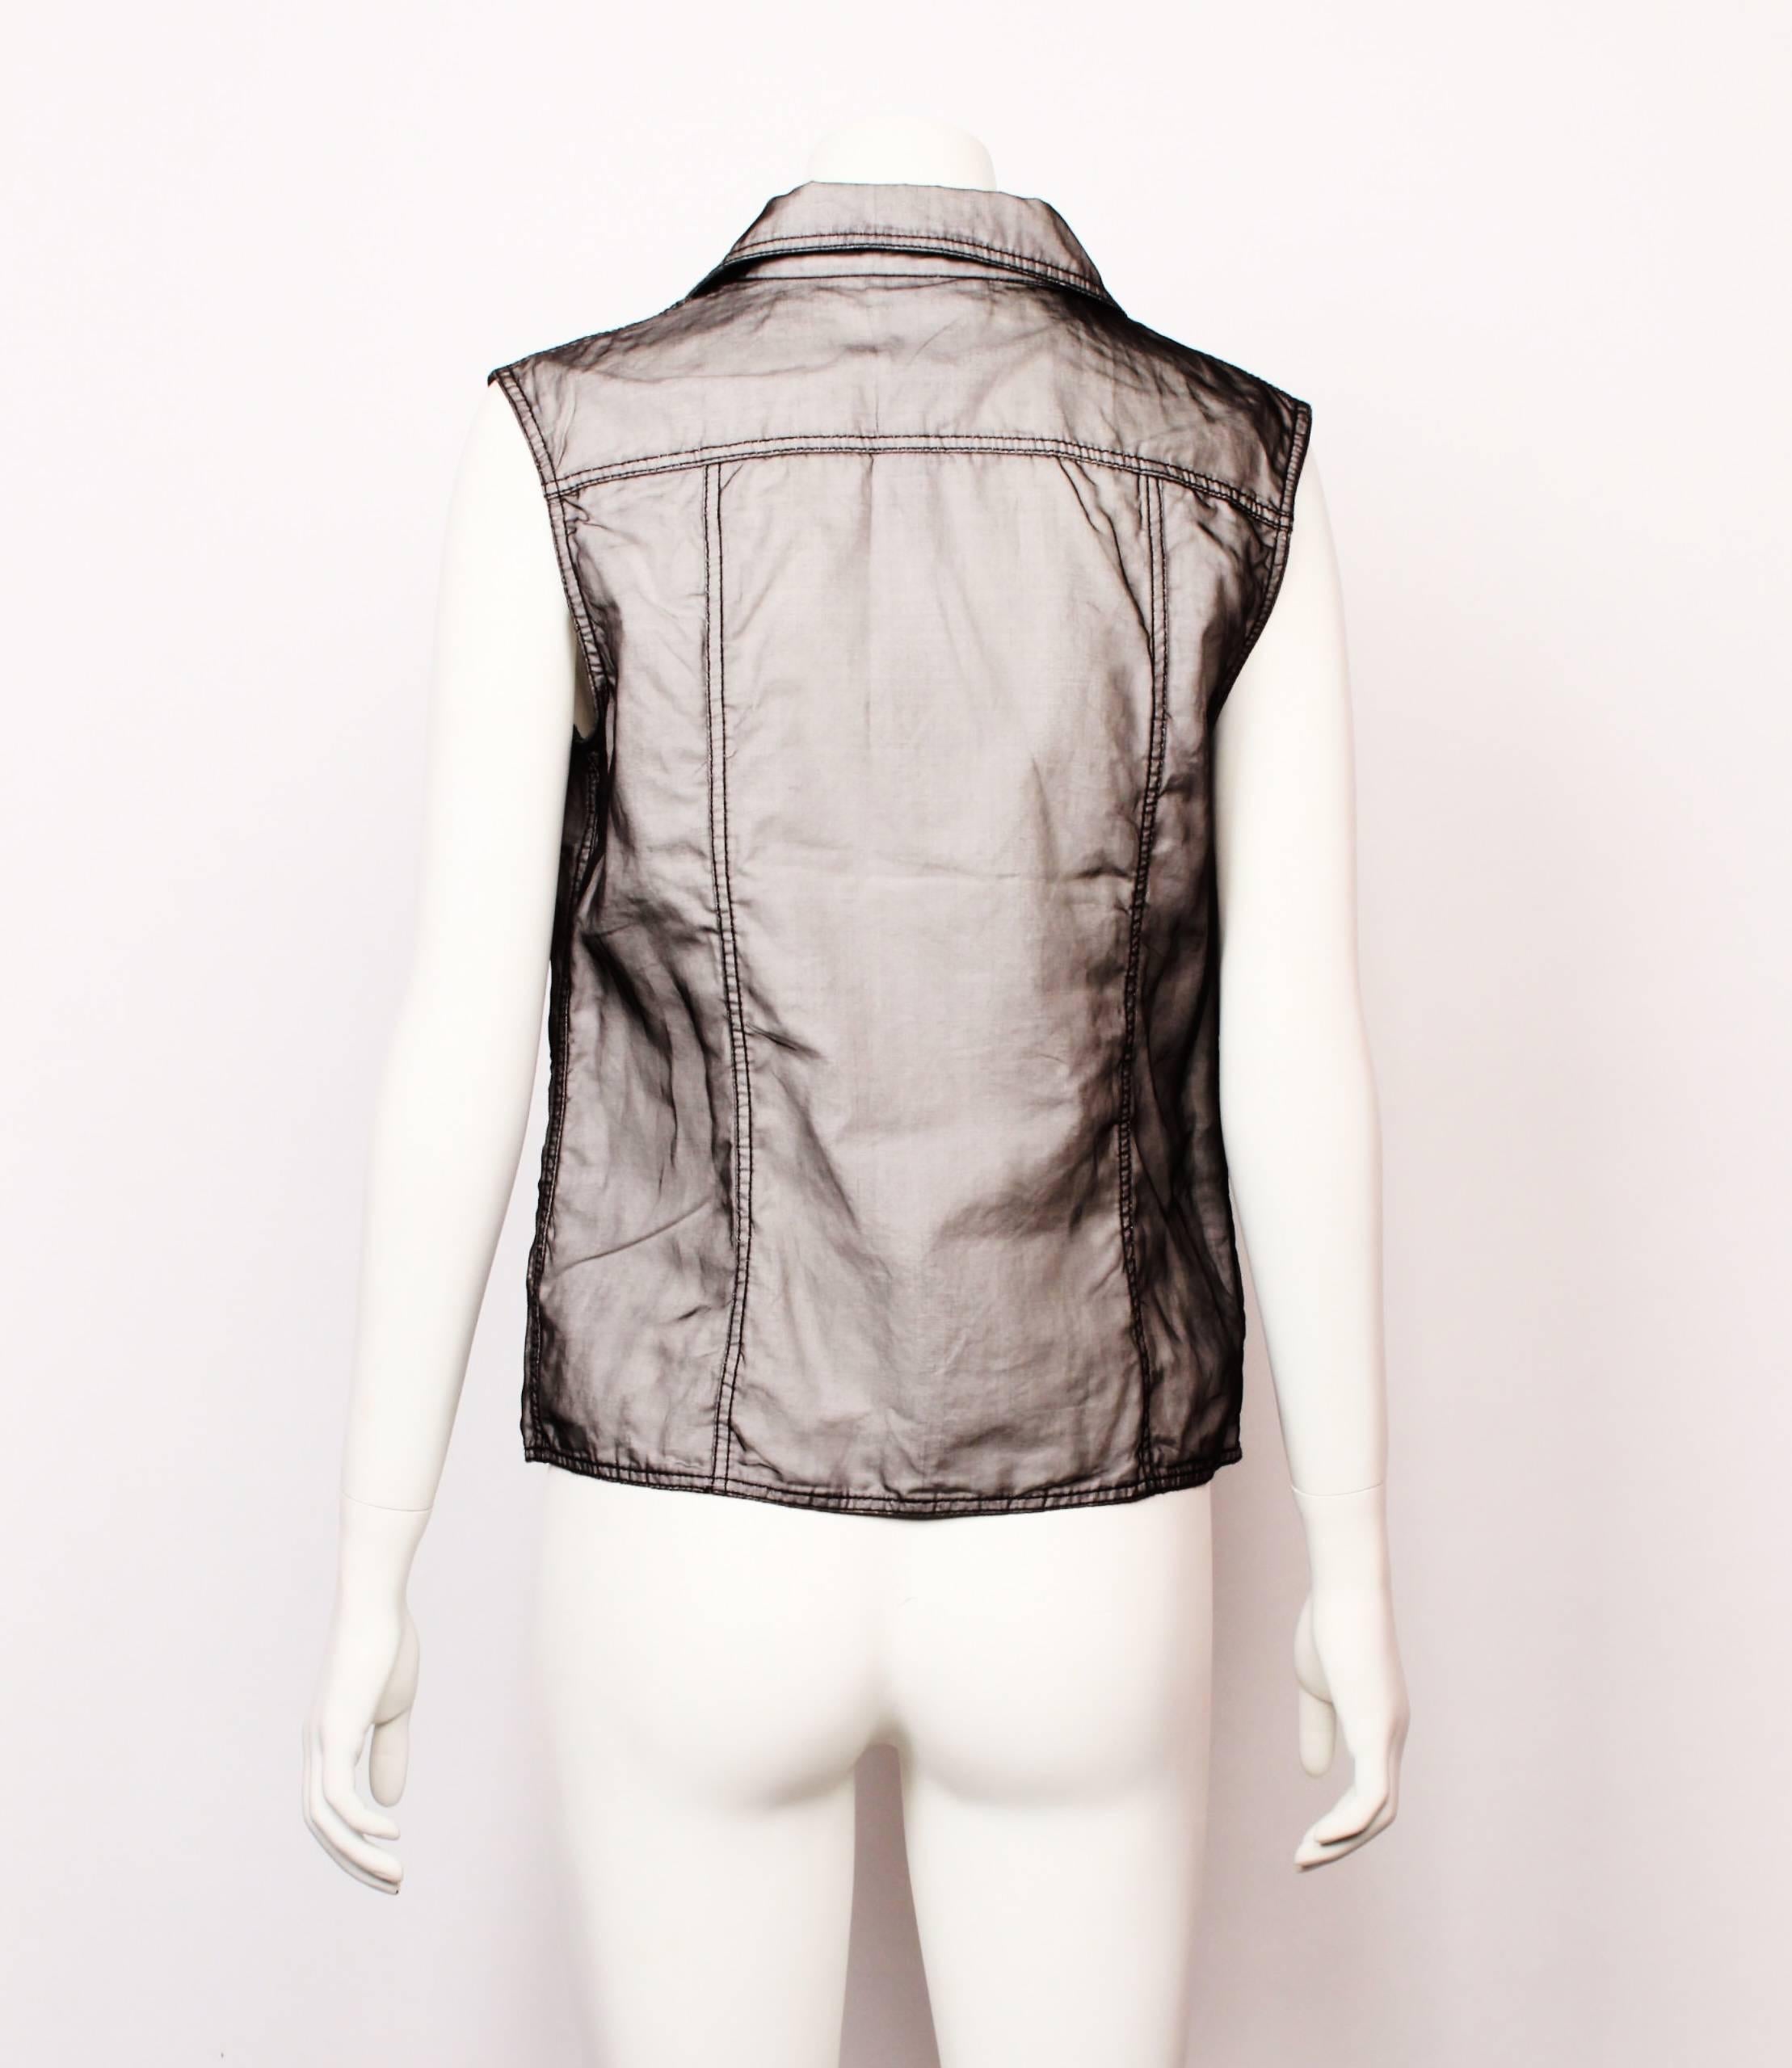 CHANEL Double Breasted Vest. Black organza is layered over white cotton to create a shot affect. 
Features black contrast top stitching, welt pockets and gun metal decorative Chanel cc logo buttons.